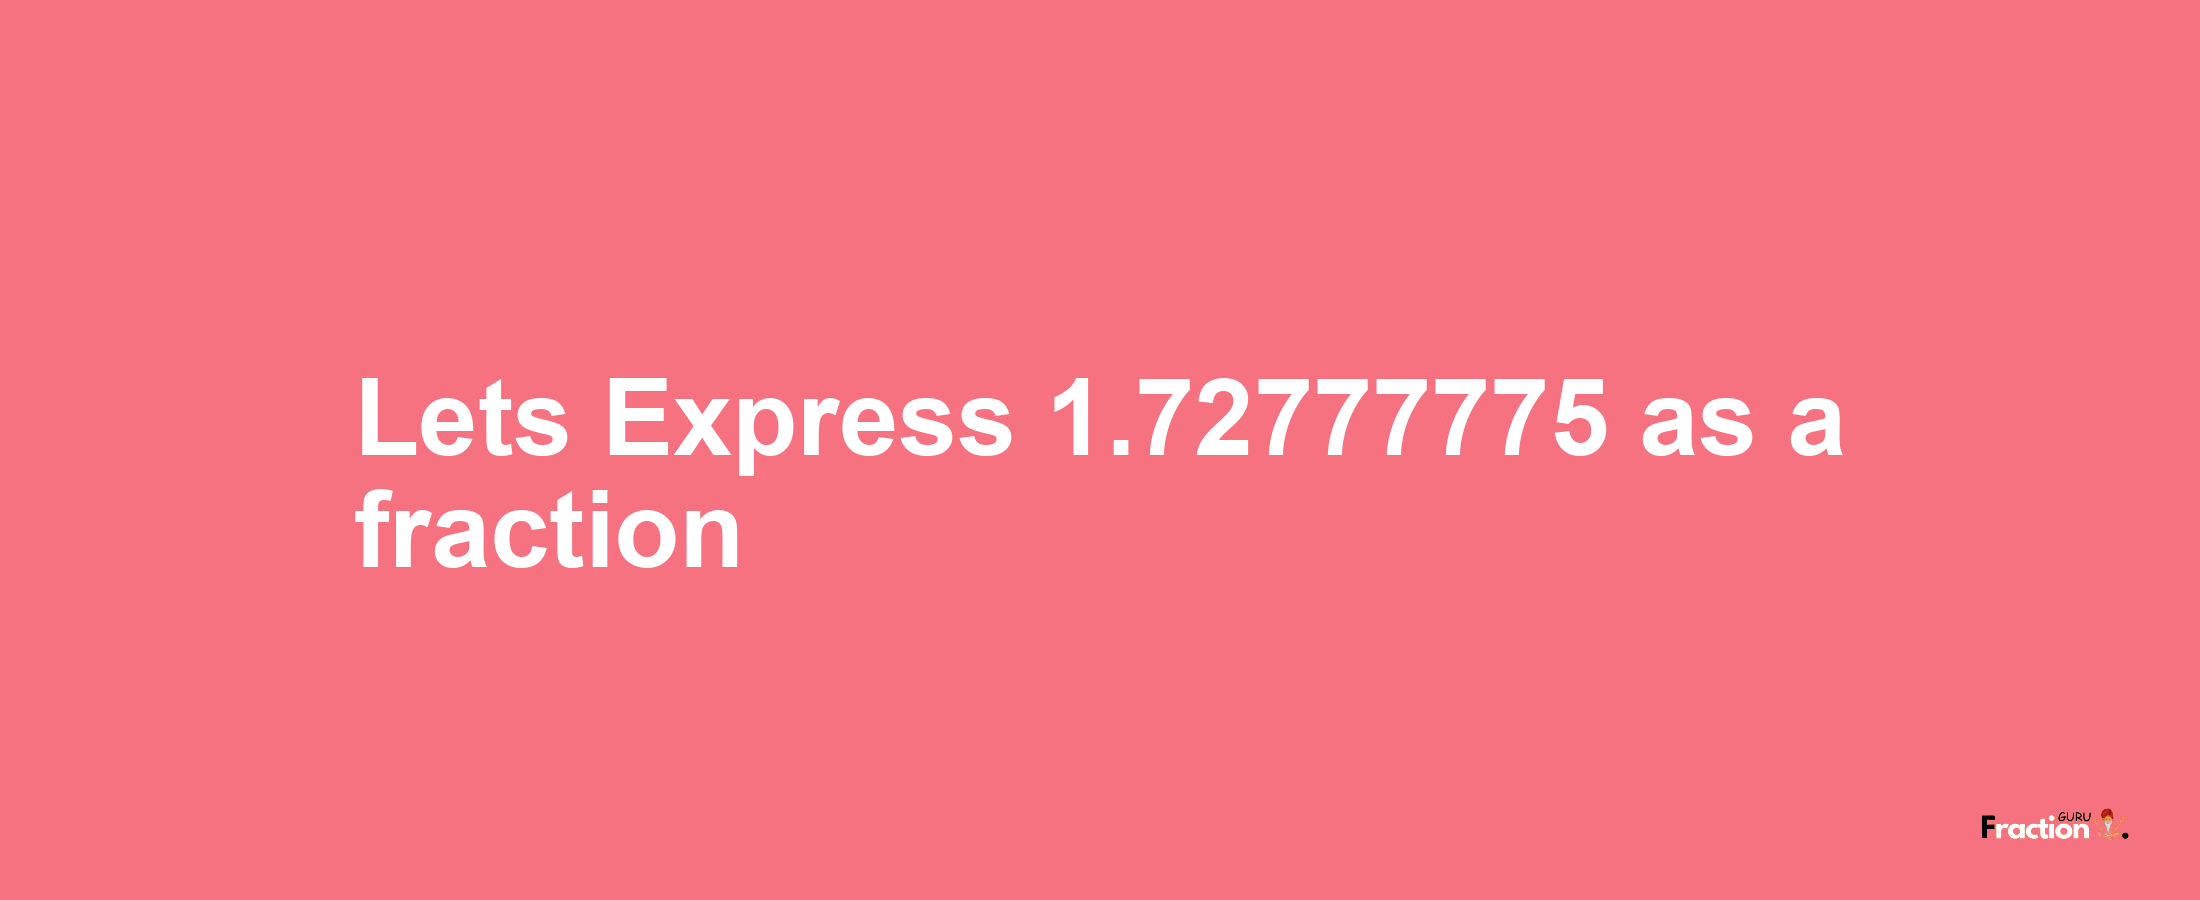 Lets Express 1.72777775 as afraction